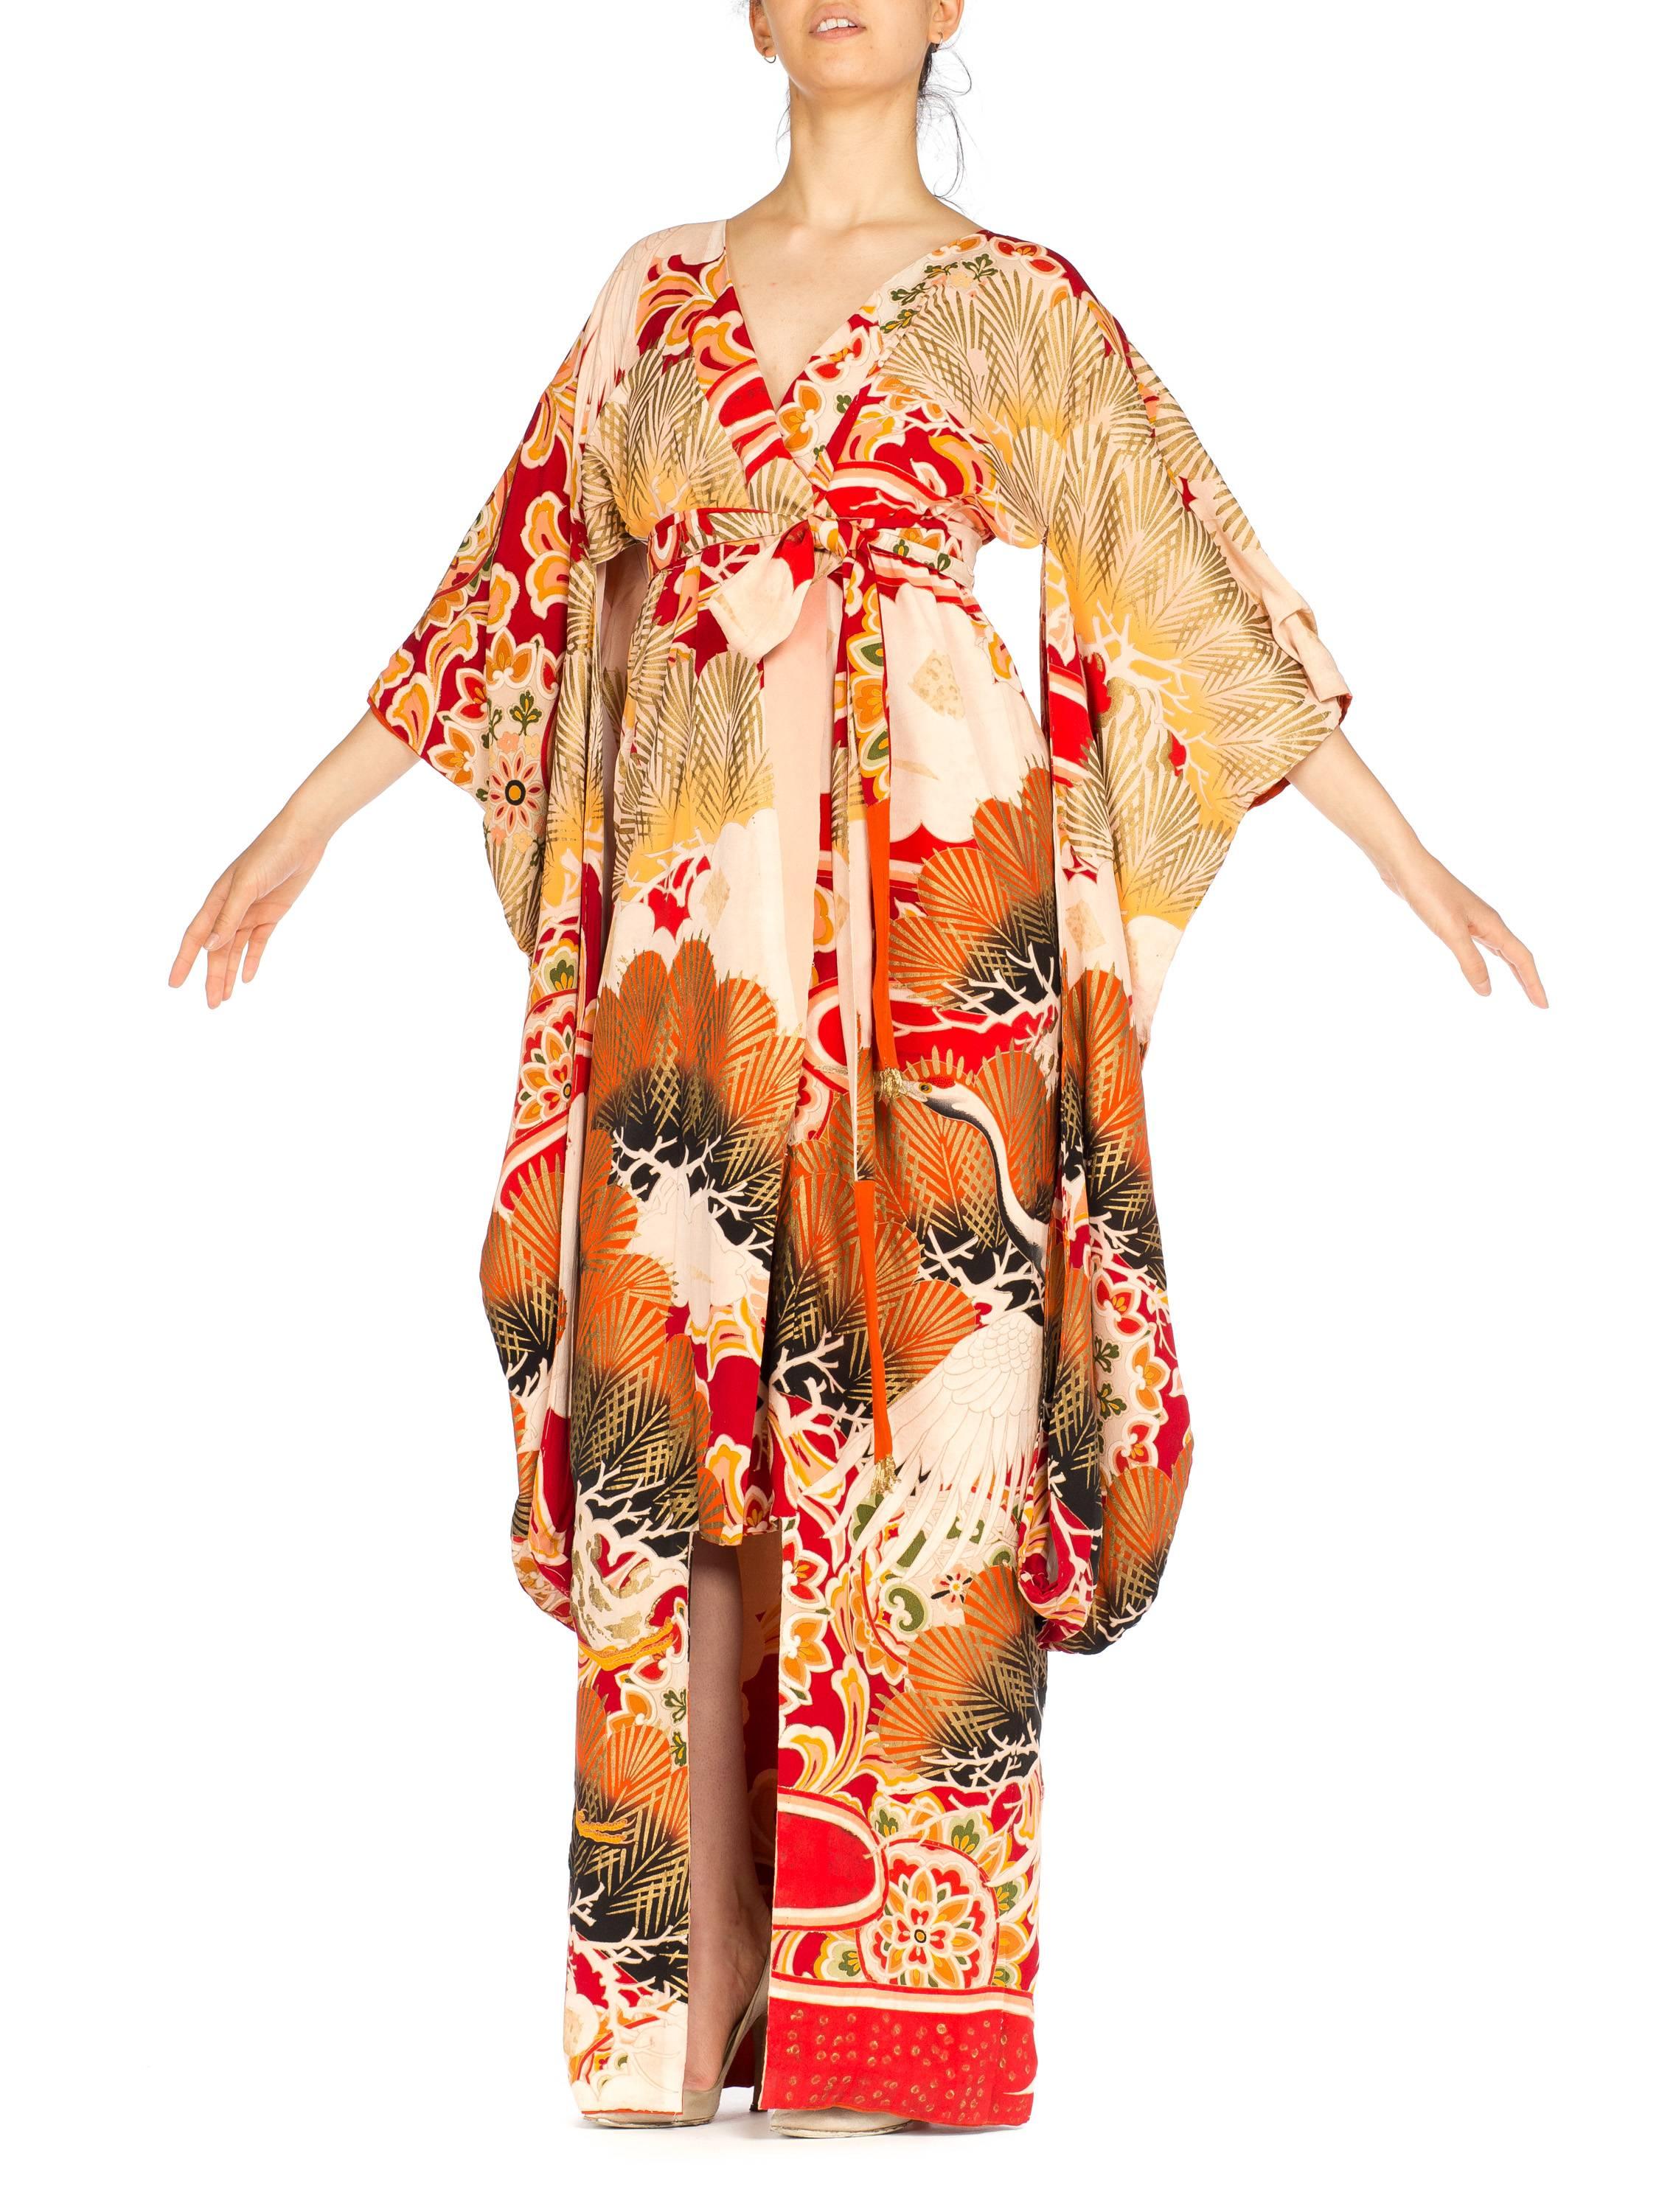 MORPHEW COLLECTION Hand Painted Silk Wrap Kimono Dress Made From An Antique 192 5